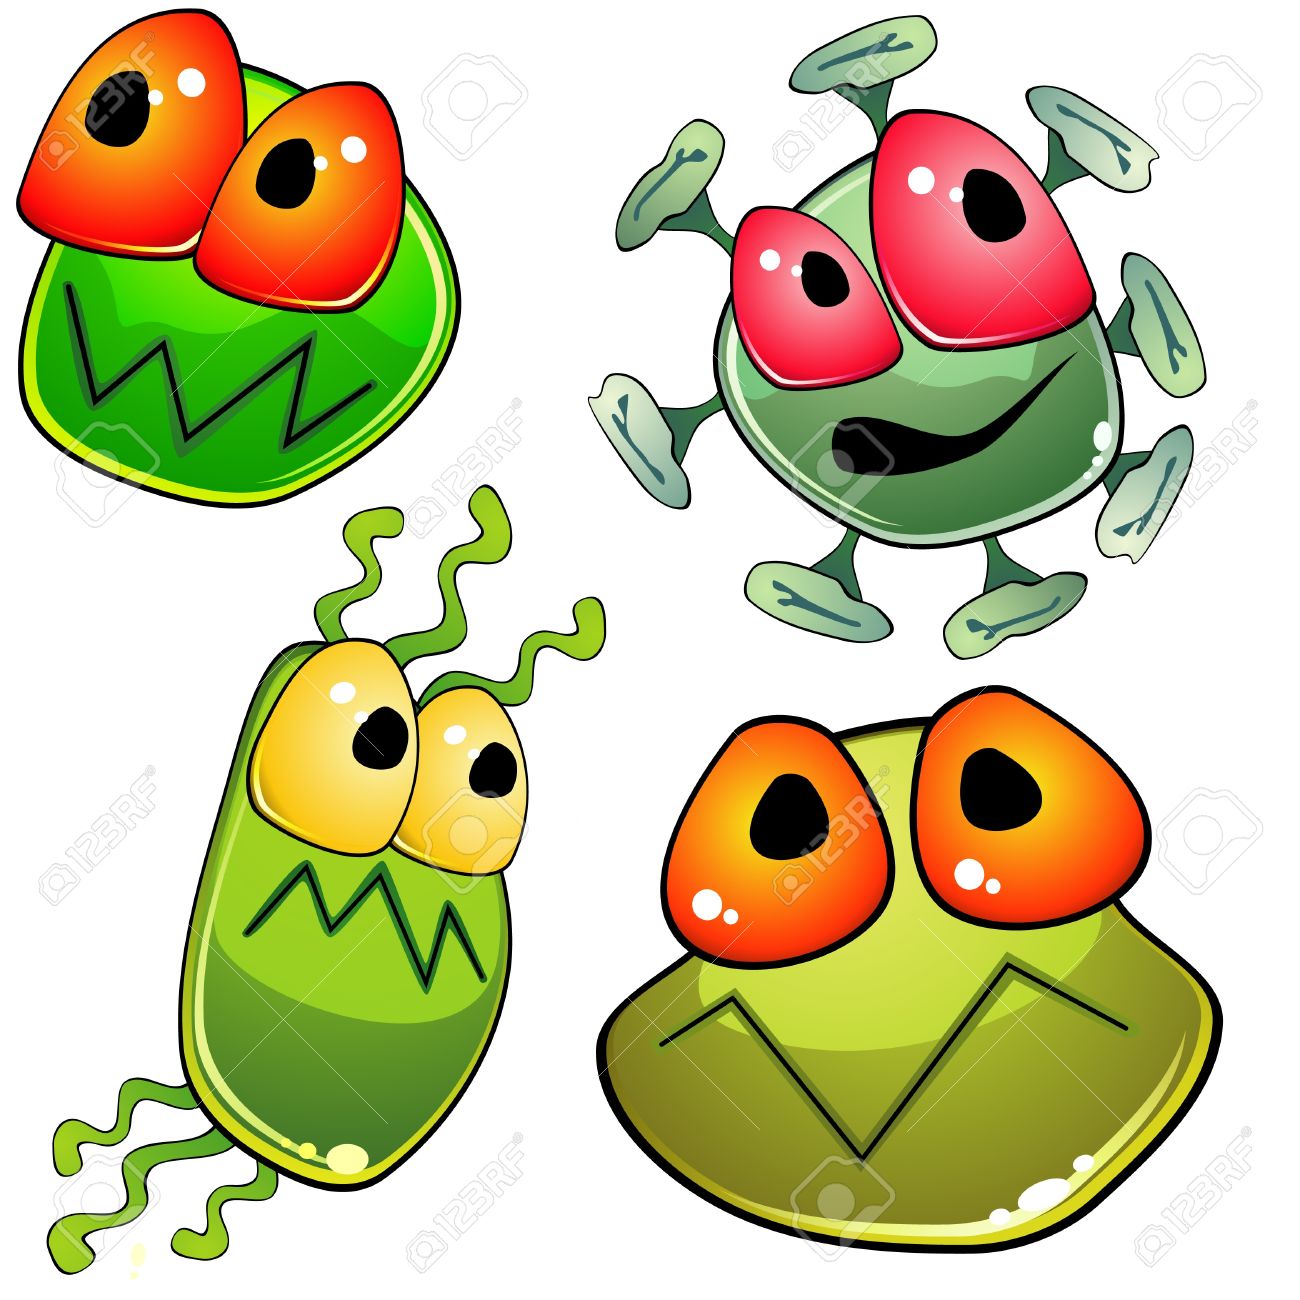 Bacteria clipart hostted 3 - Bacteria Clipart